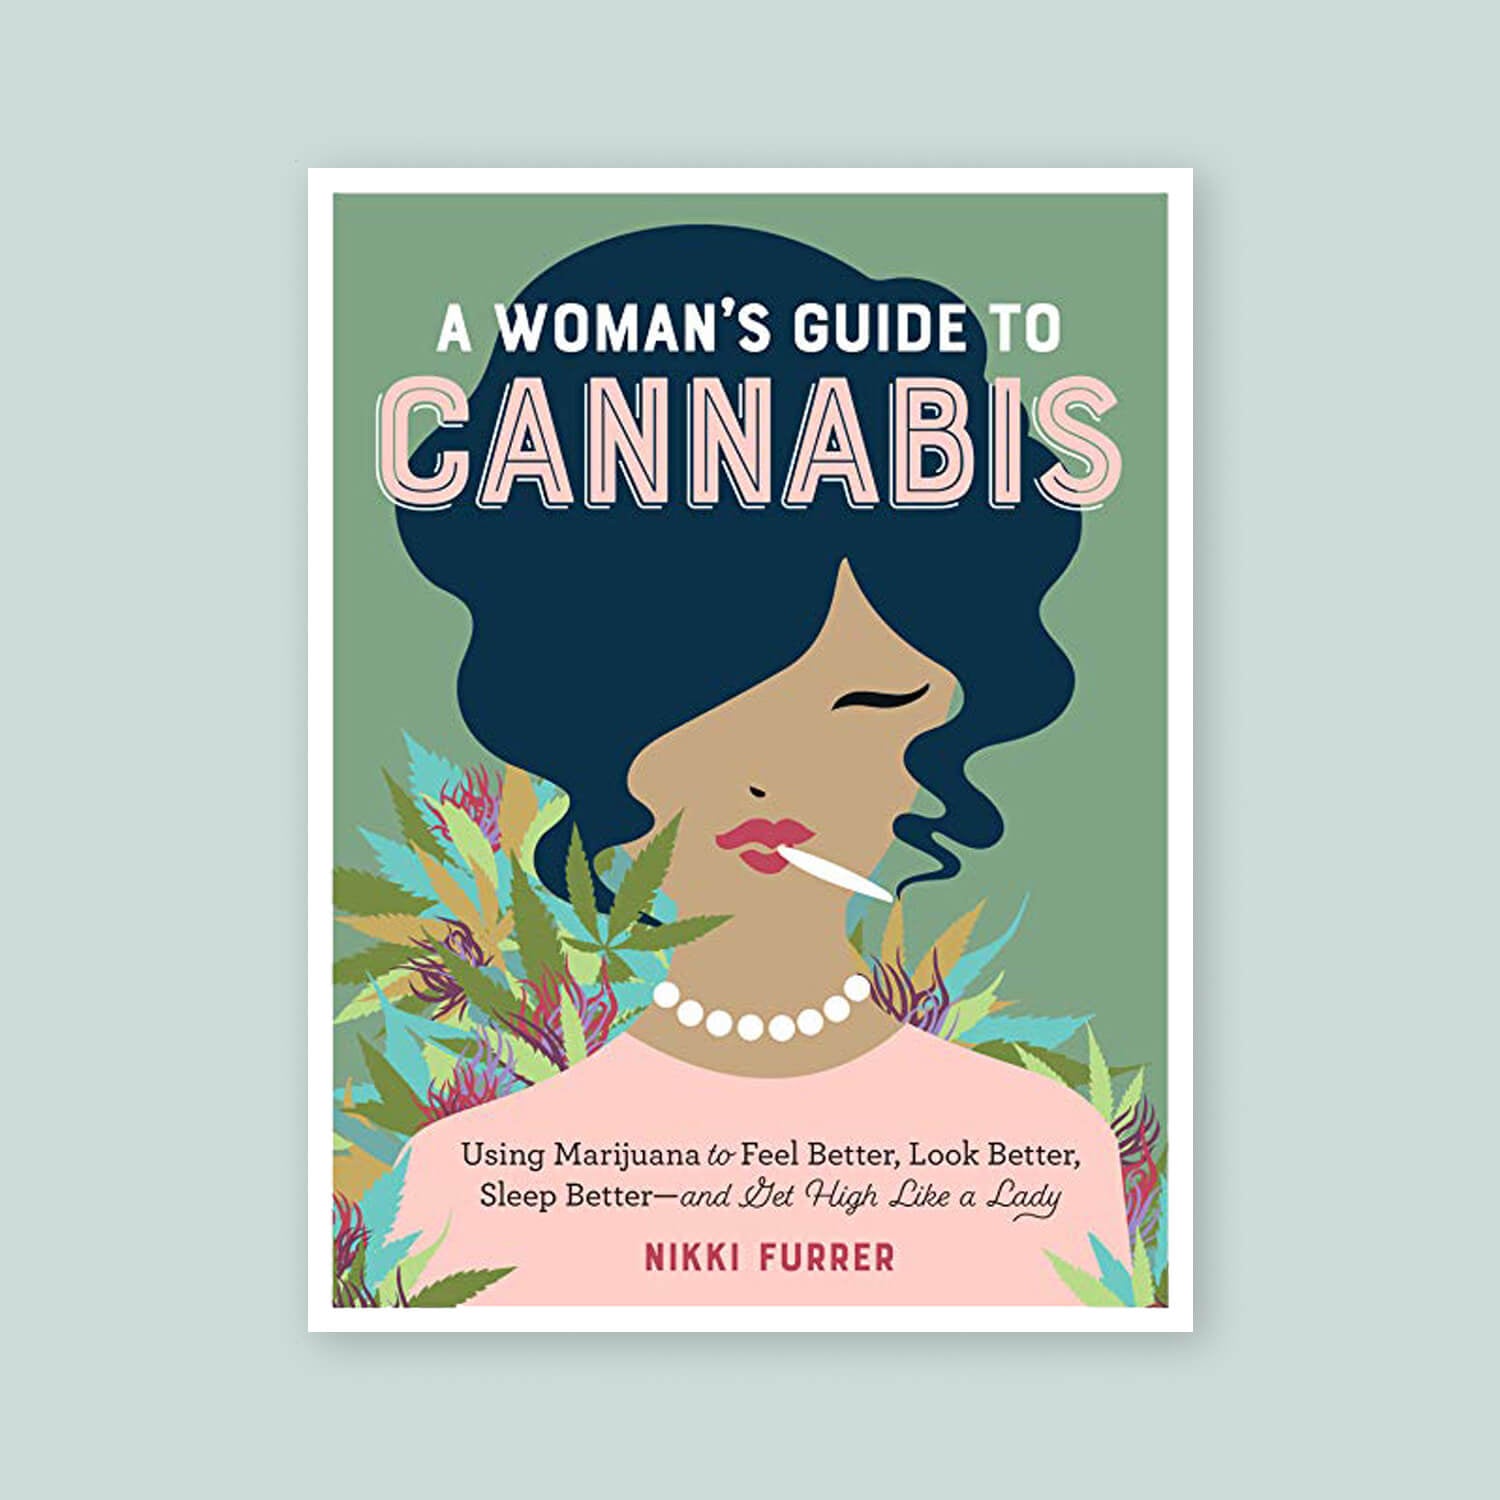 A Woman's guide to cannabis by Nikki Furrer - Goldleaf Bookshelf